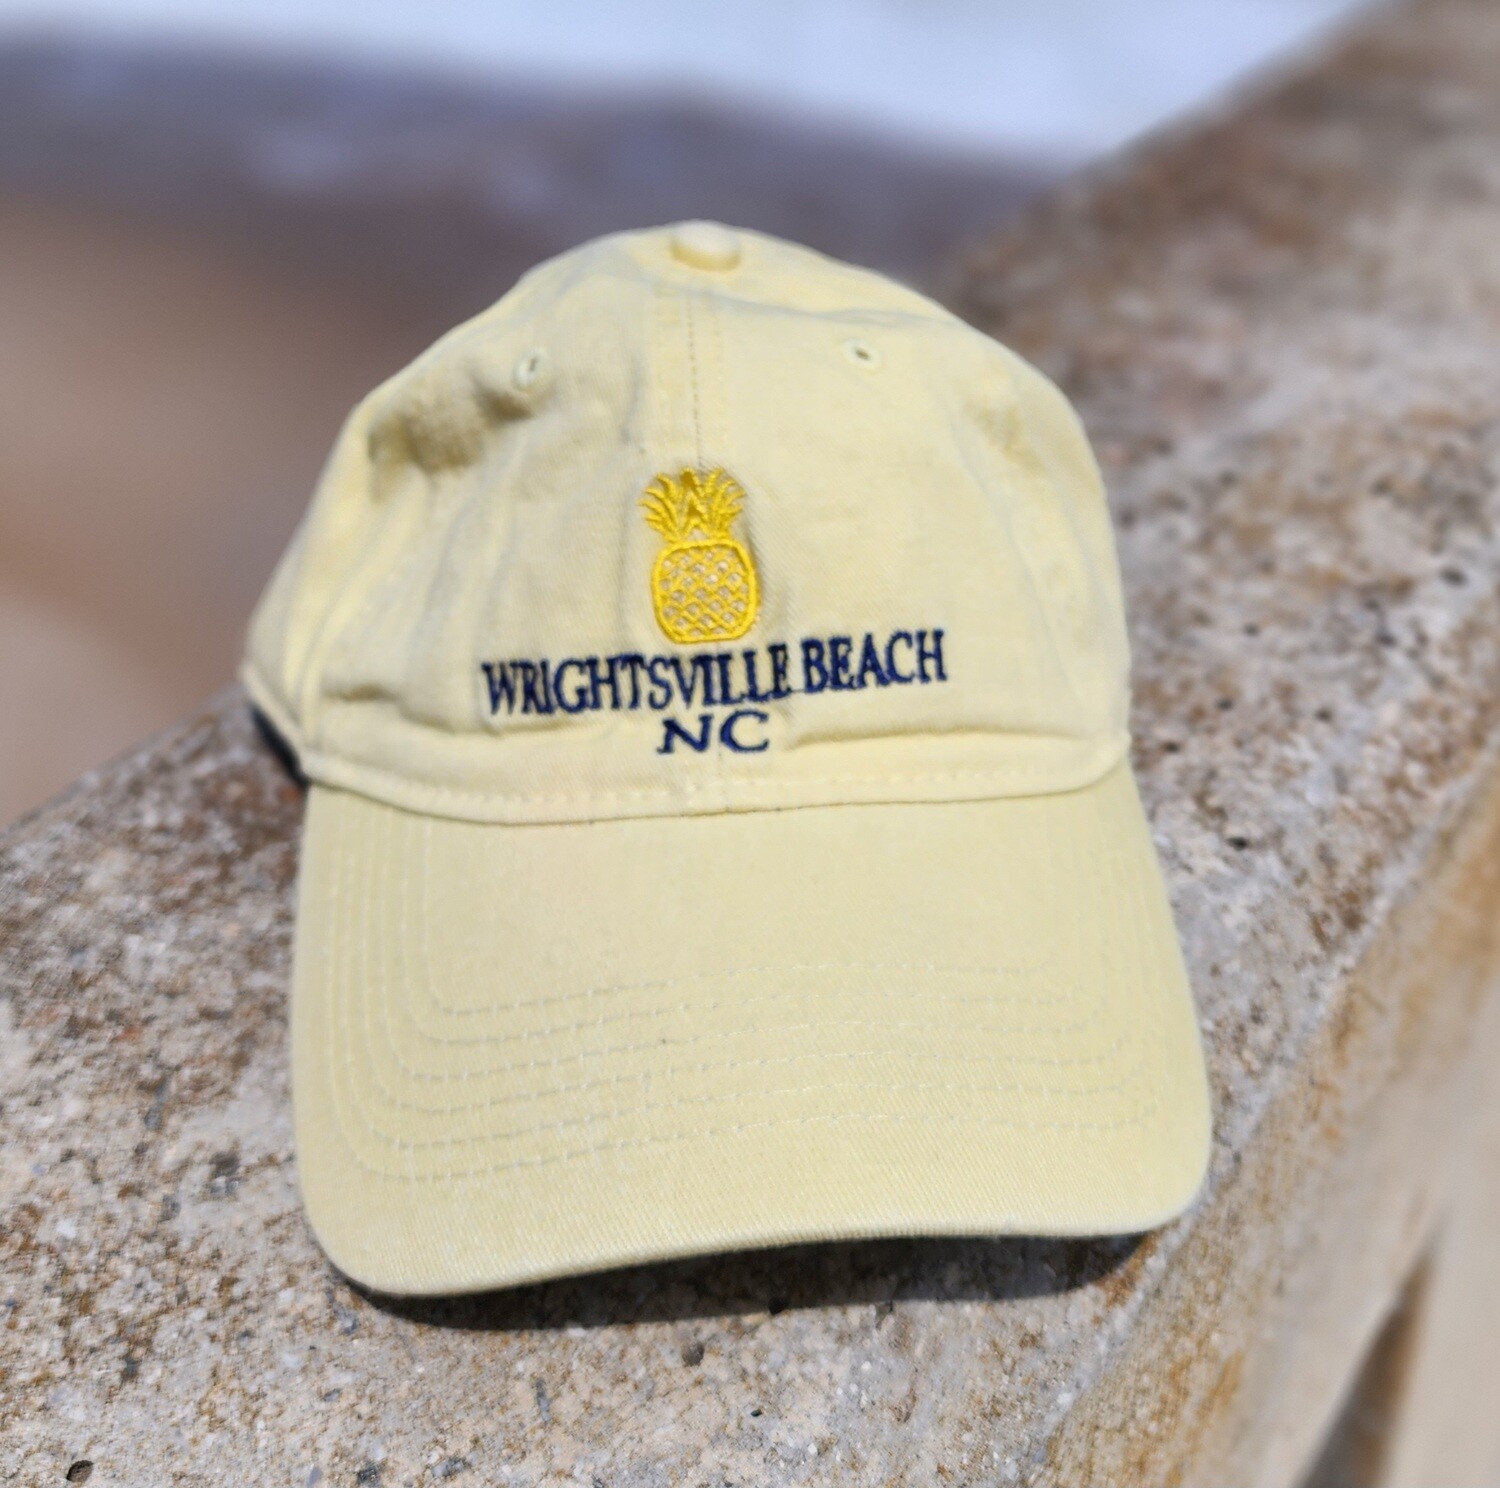 Pineapple Stitched Wrightsville Beach Hat, Color: Yellow